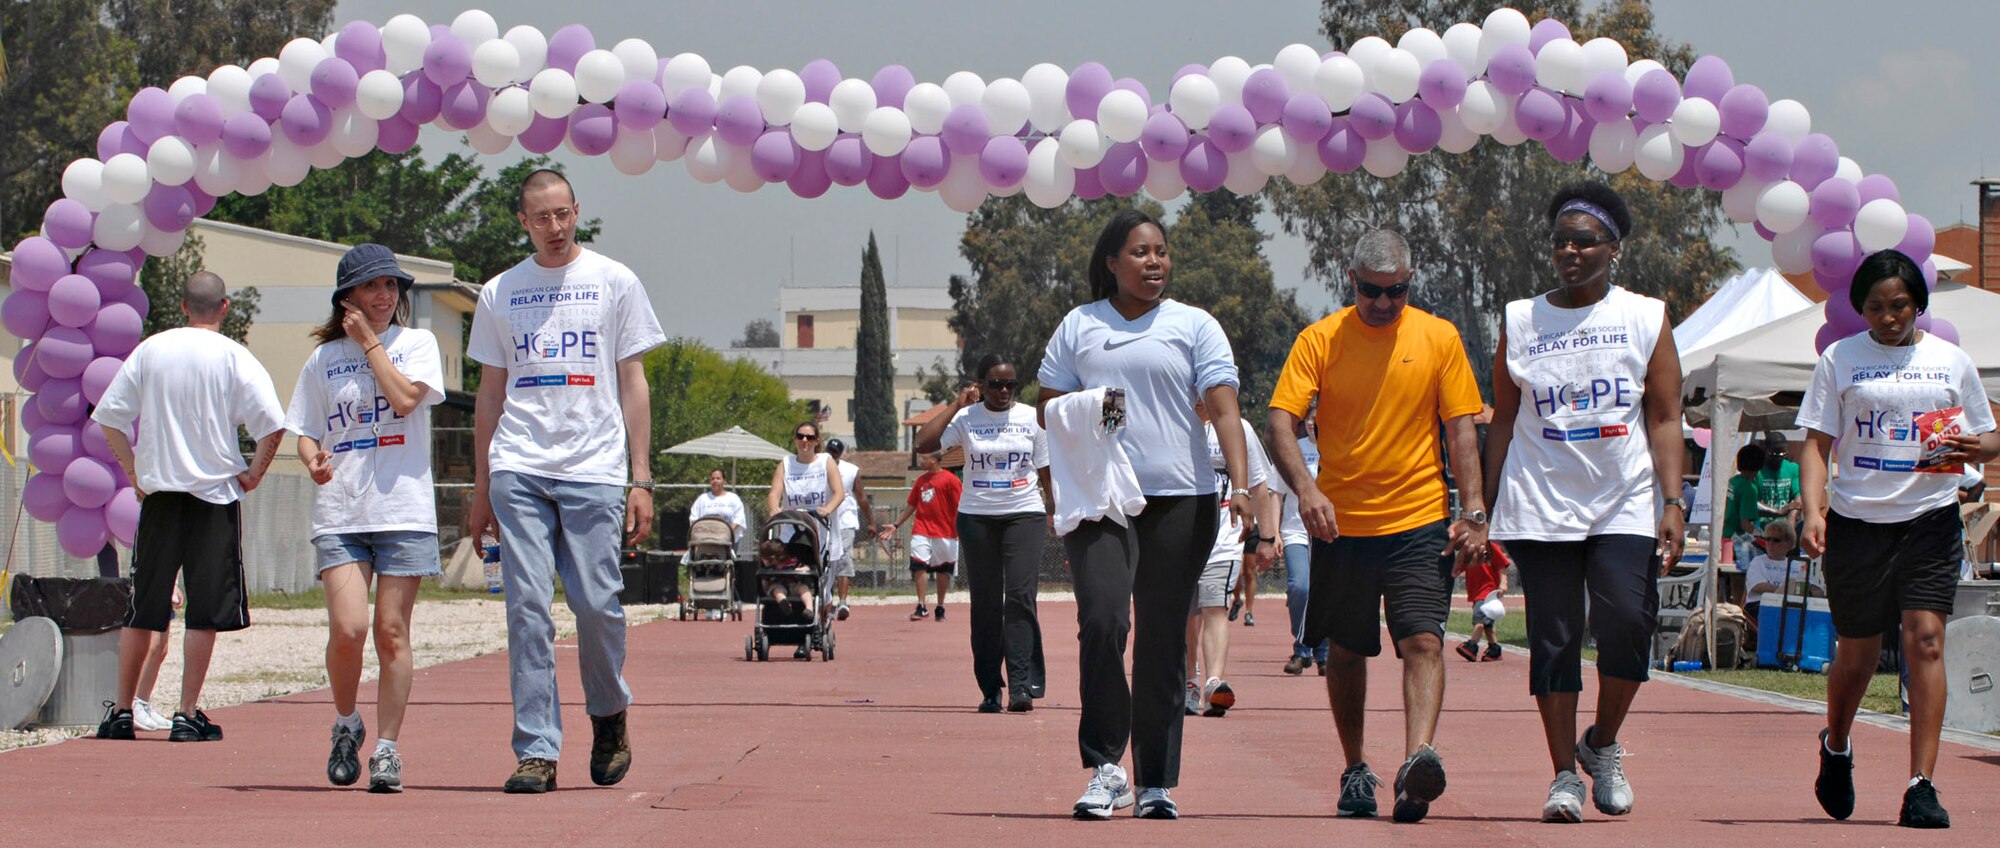 Participants in the Relay for Life walk laps around the Incirlik running track, May 9, 2009. The 2009 Relay for Life was the first relay available to members of the Incirlik community and hosted more than 300 participants from 20 teams, raising more than $9,500. The event lasted 12 hours and included a luminaria ceremony in which participants wrote the names of cancer survivors and victims on more than 100 luminary bags. (U.S. Air Force photo/Senior Airman Benjamin Wilson)